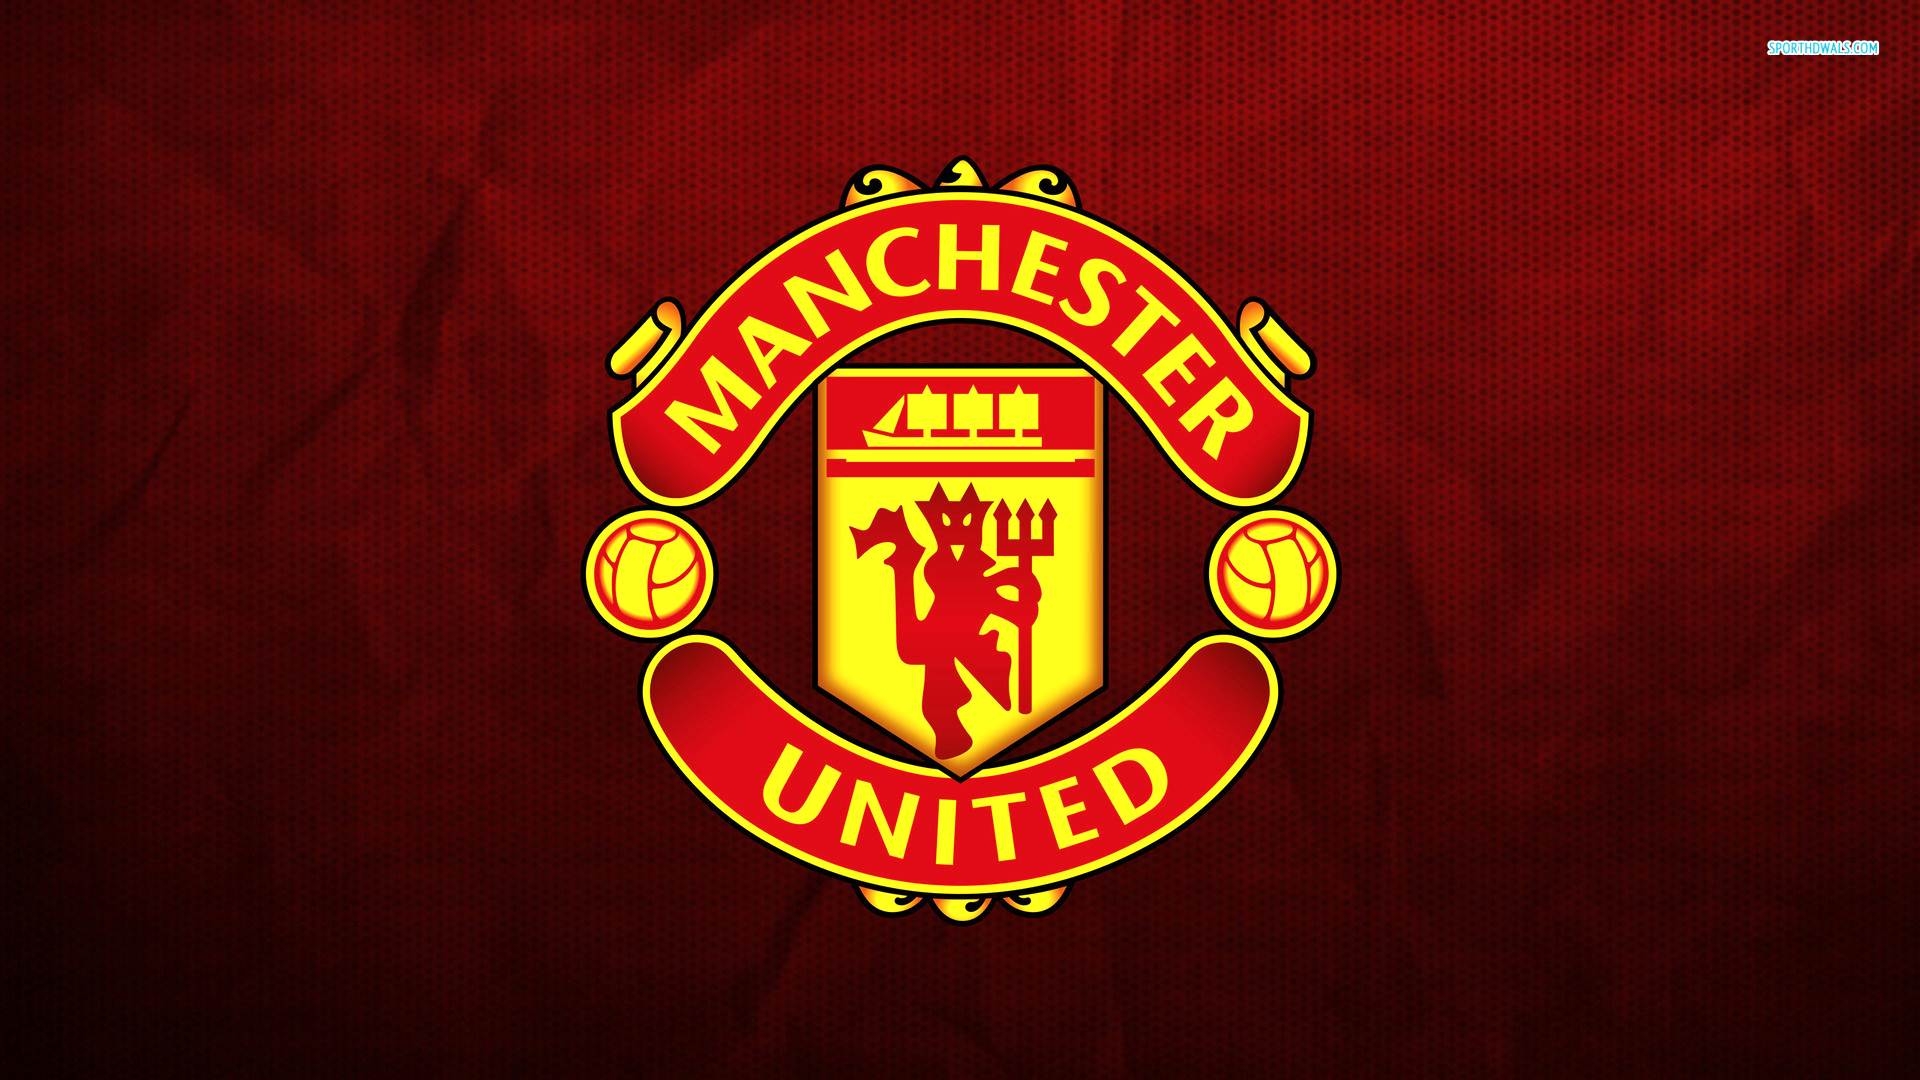 Best Of Manchester United Wallpaper HD Great Foofball Club